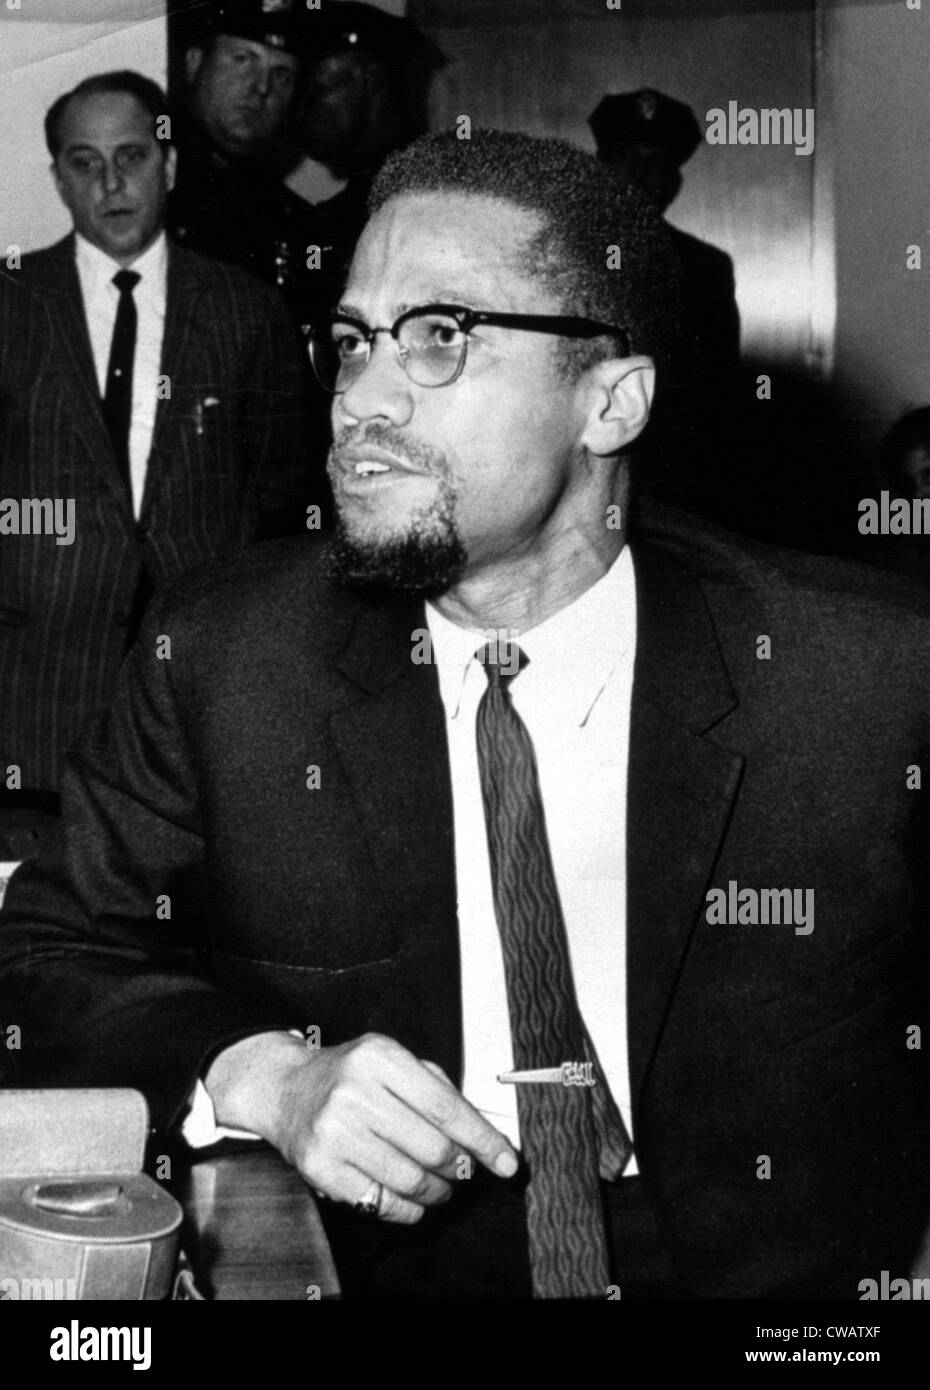 Malcolm X, during a press conference in New York, 11/24/64.. Courtesy: CSU Archives / Everett Collection Stock Photo